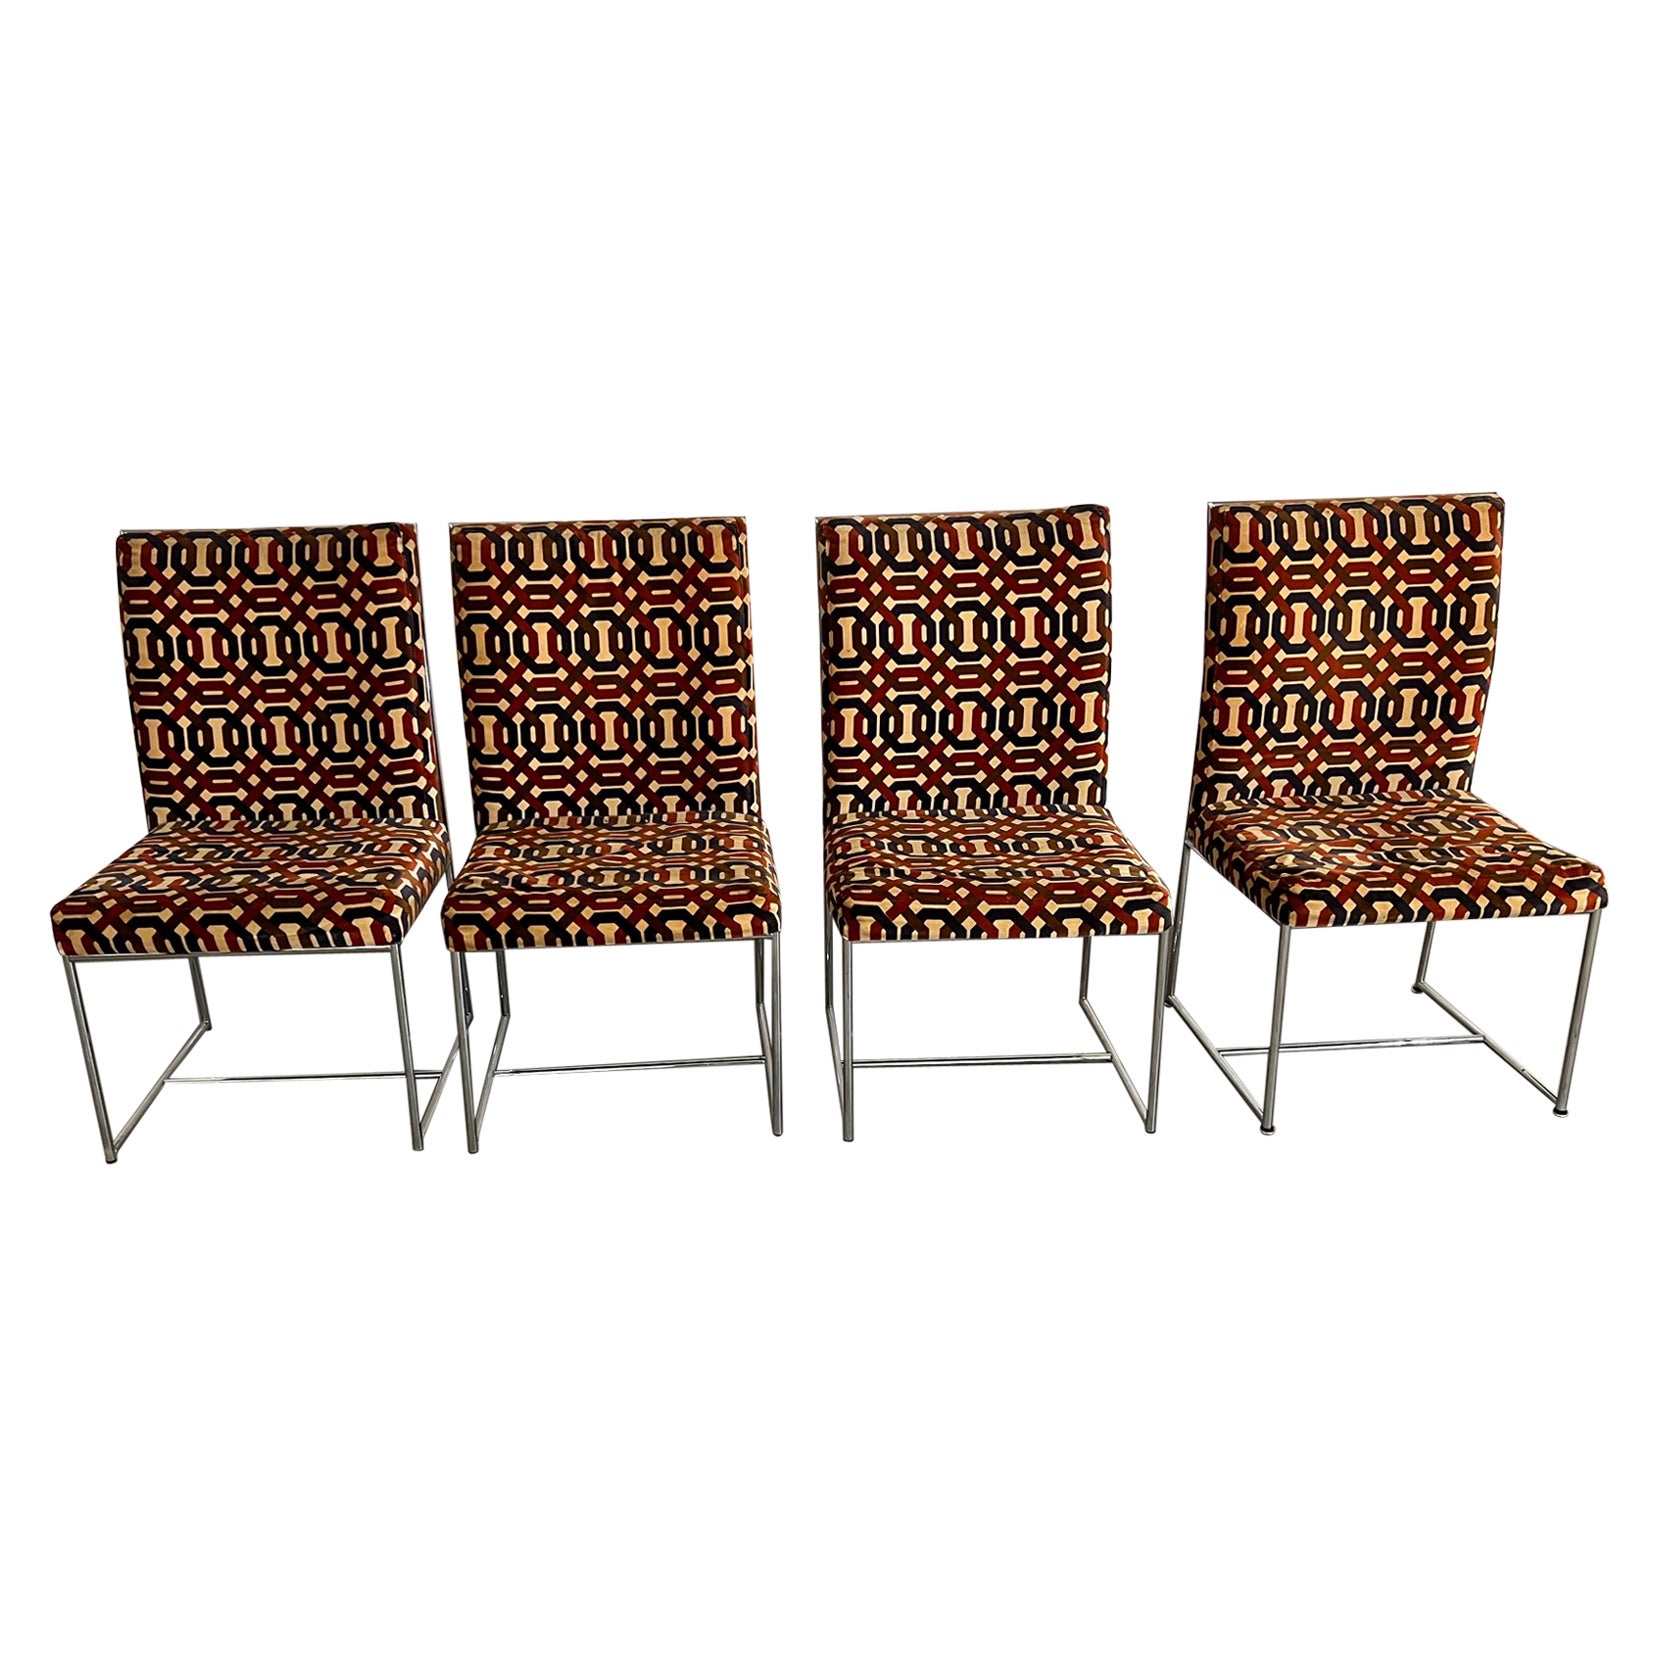 Set of 4 Mid-Century Modern Milo Baughman for Thayer Coggin Chrome Dining Chairs For Sale